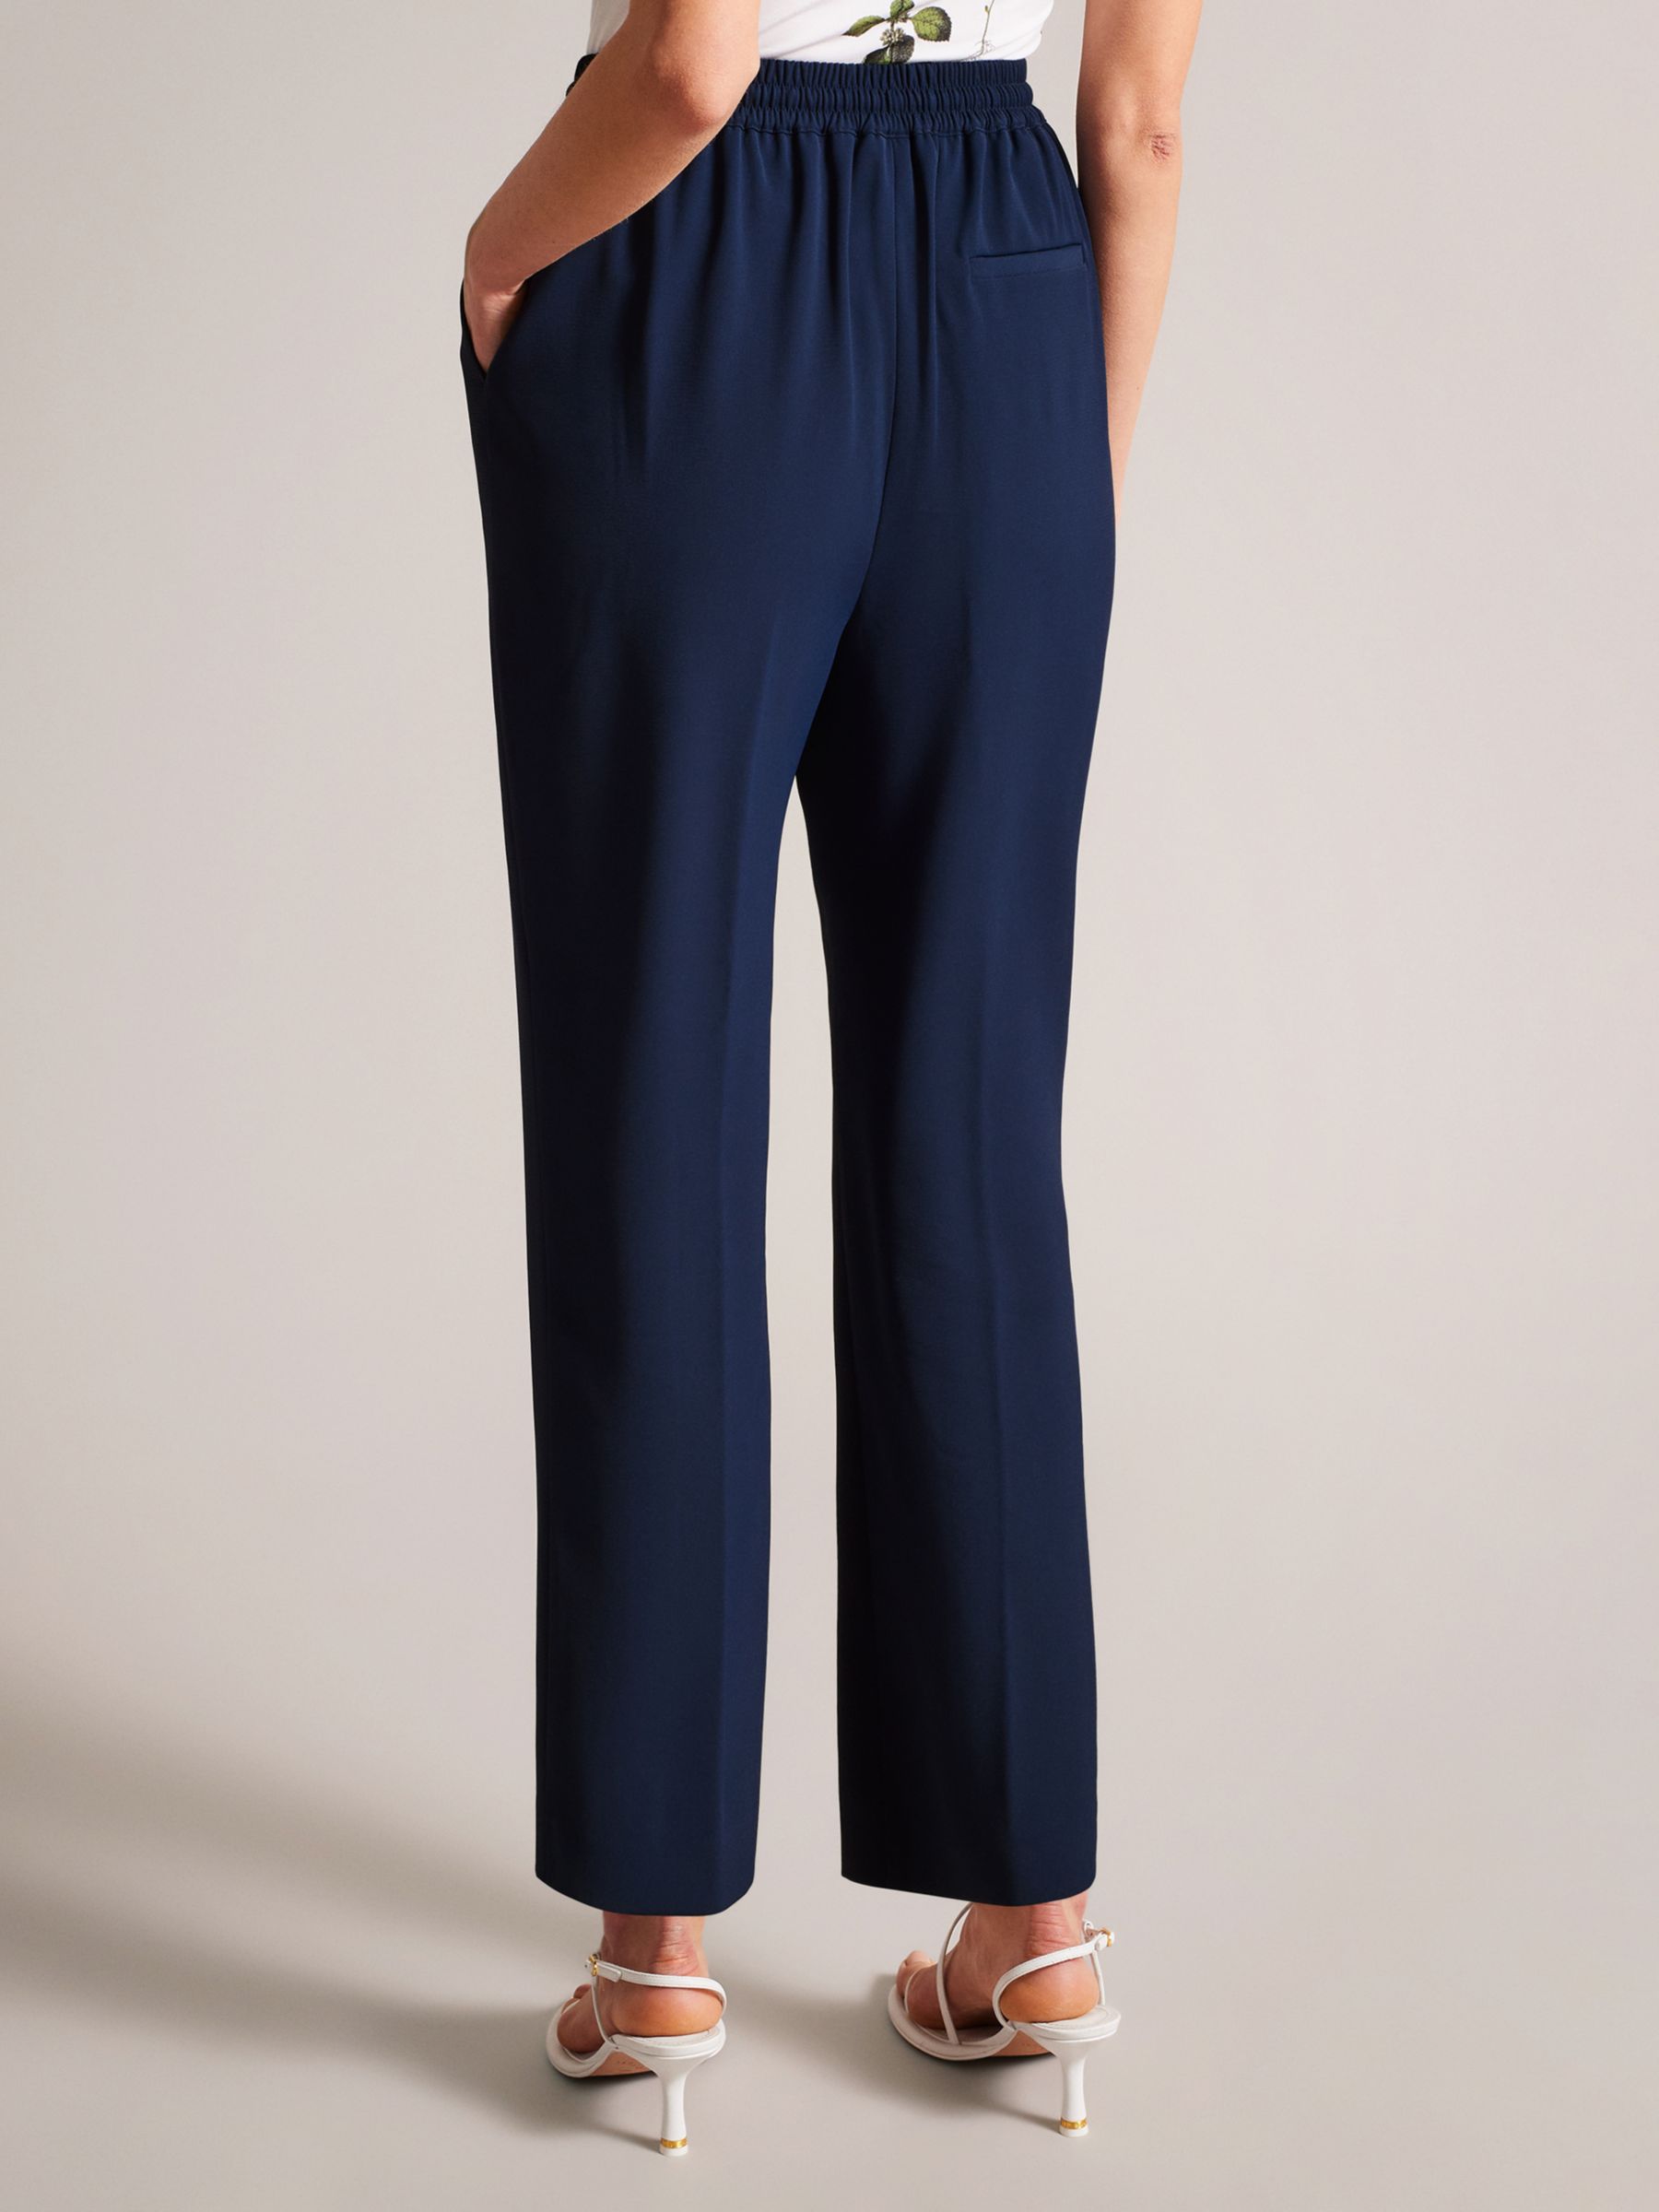 Ted Baker Laurai Slim Cut Ankle Length Jogger, Navy at John Lewis ...